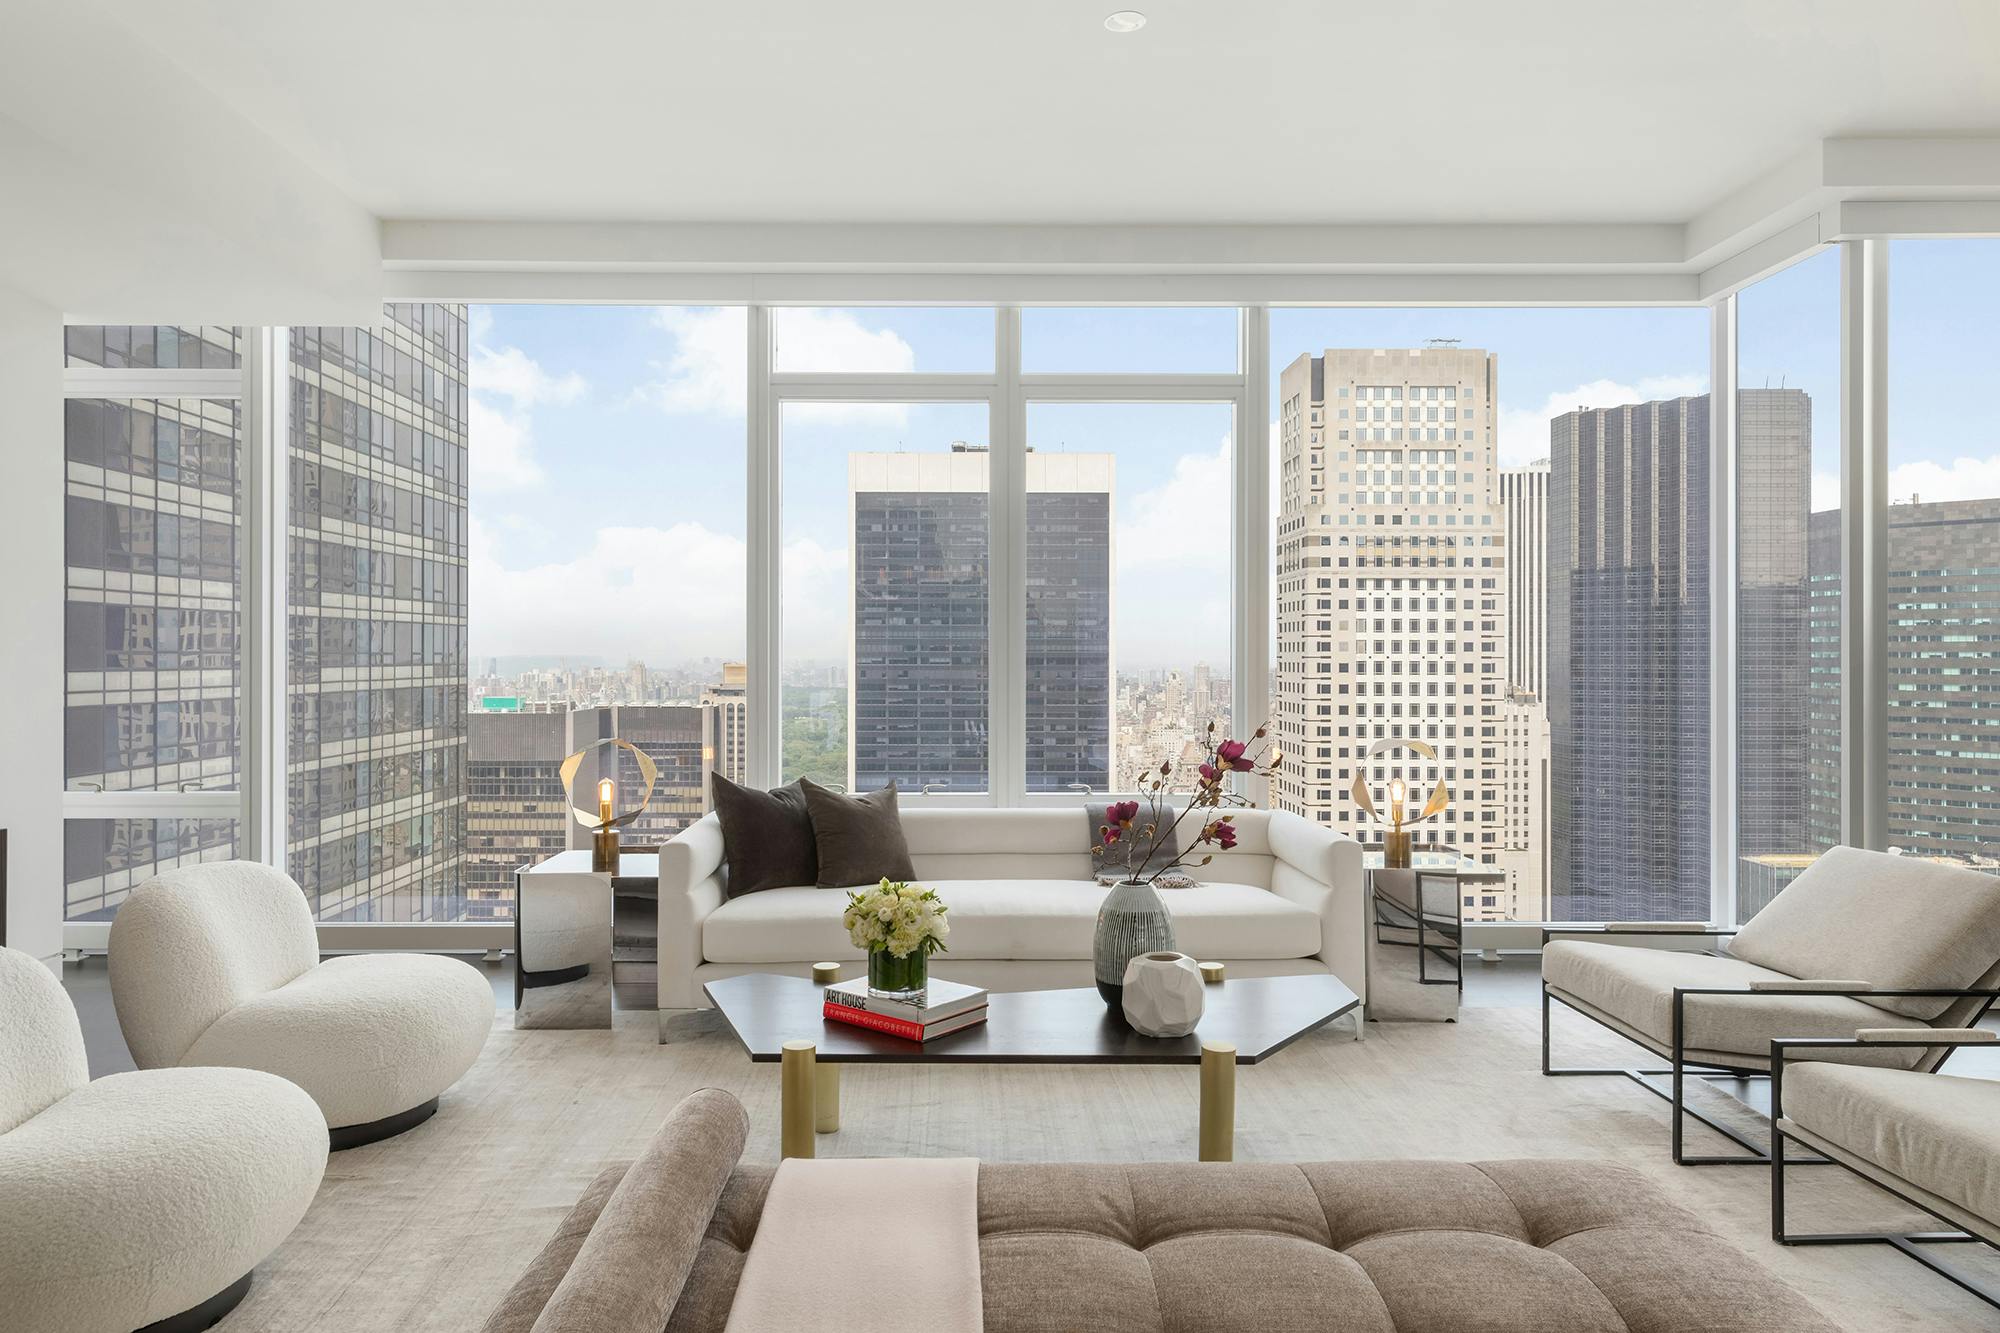 Meridith-Baer-Home-Home-Staging-New-York-Flatiron-Contemporary-Condo-Highrise-Condos-and-Lofts-Transitional-Living-Room-Location-New-York